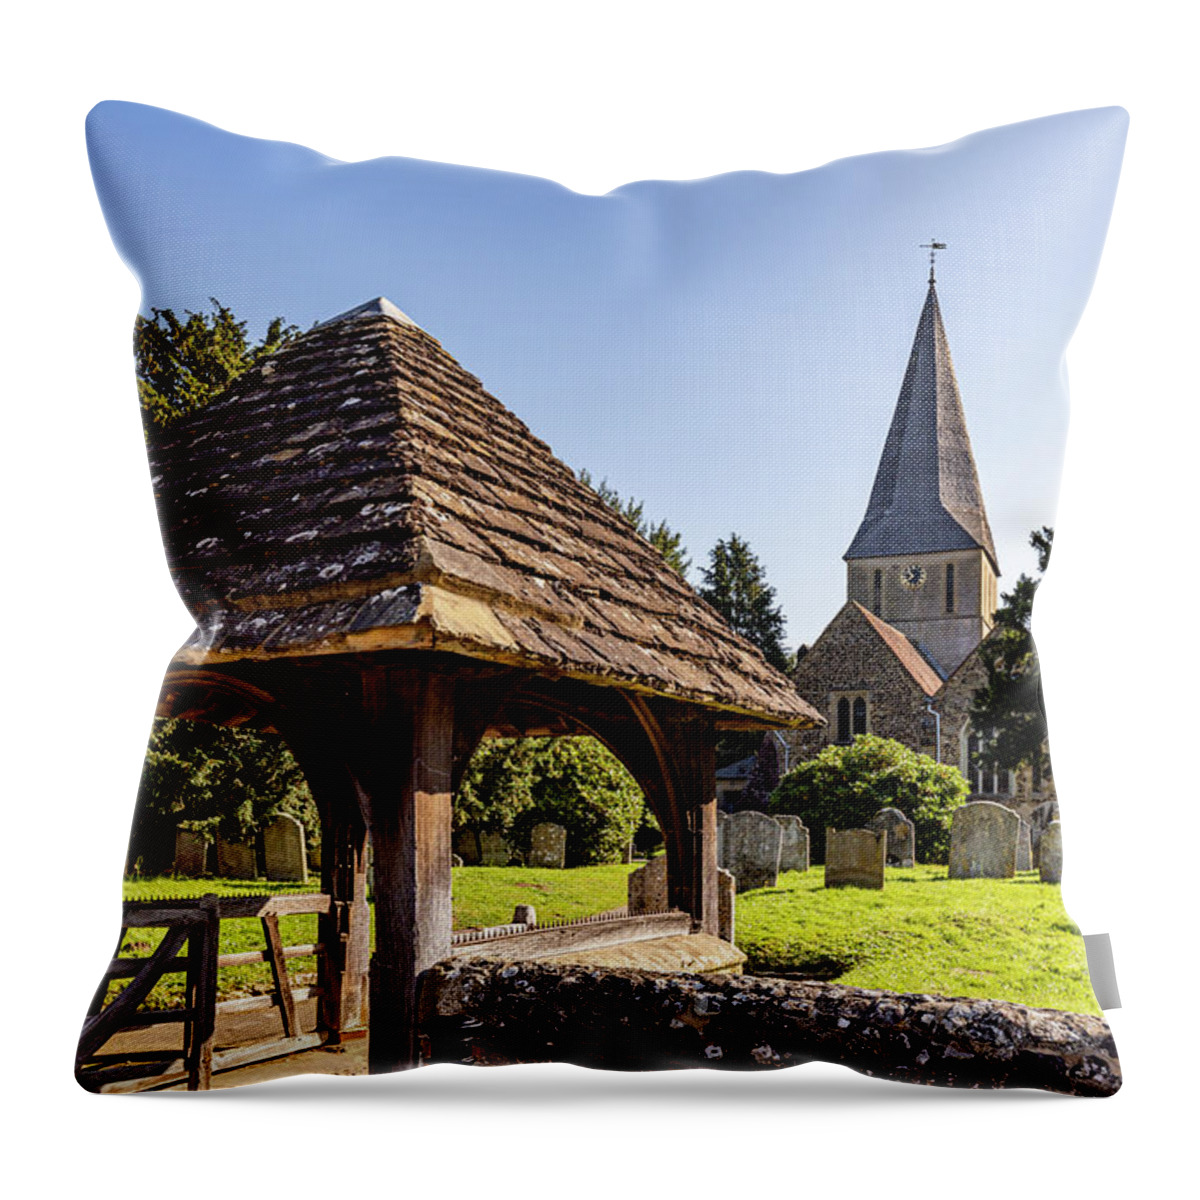 Buildings Throw Pillow featuring the photograph St James, Shere by Shirley Mitchell